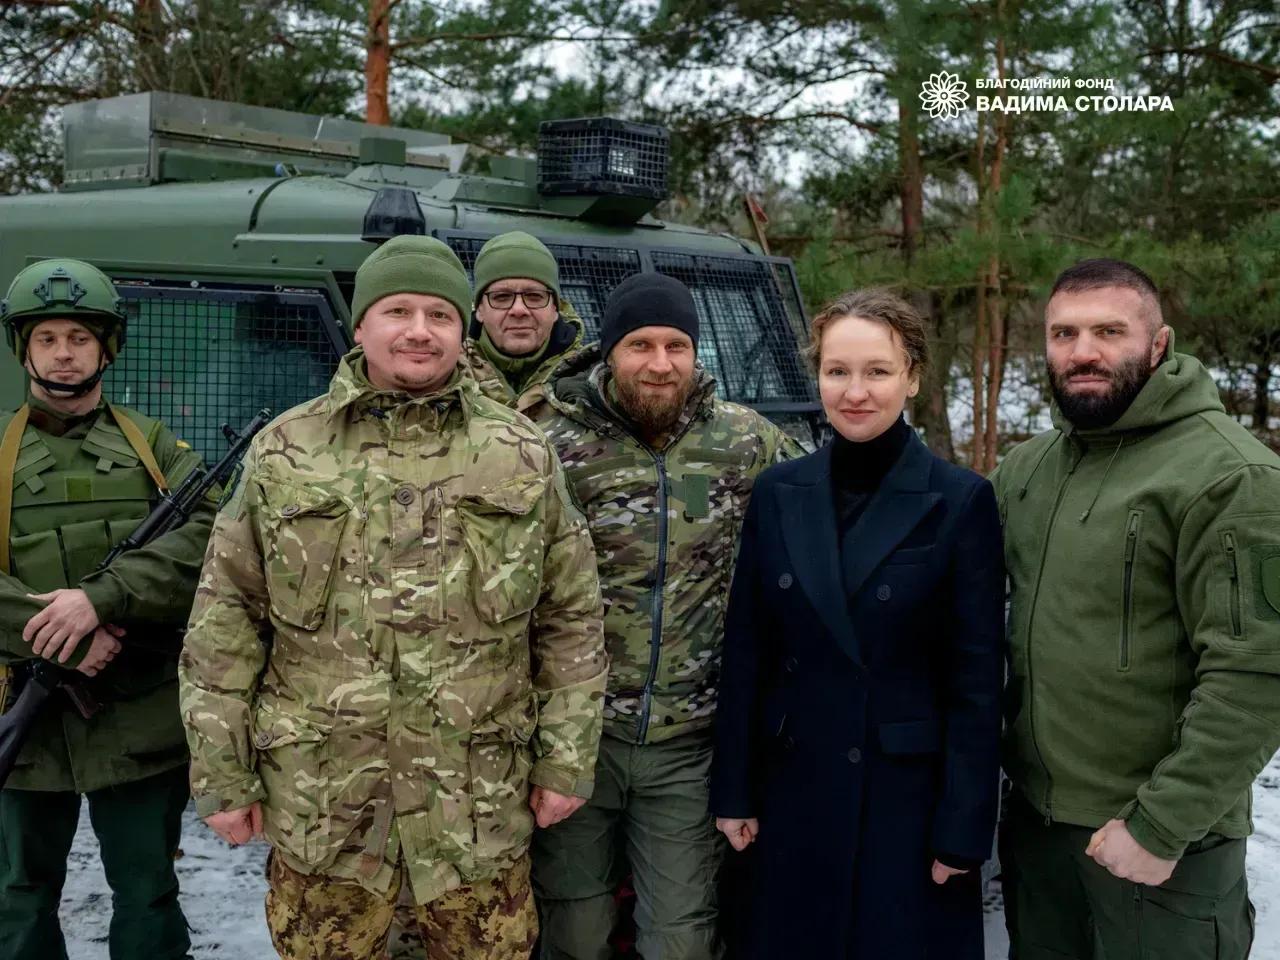 The Vadym Stolar Charitable Foundation handed over another armored car with increased cross-country ability to the defen